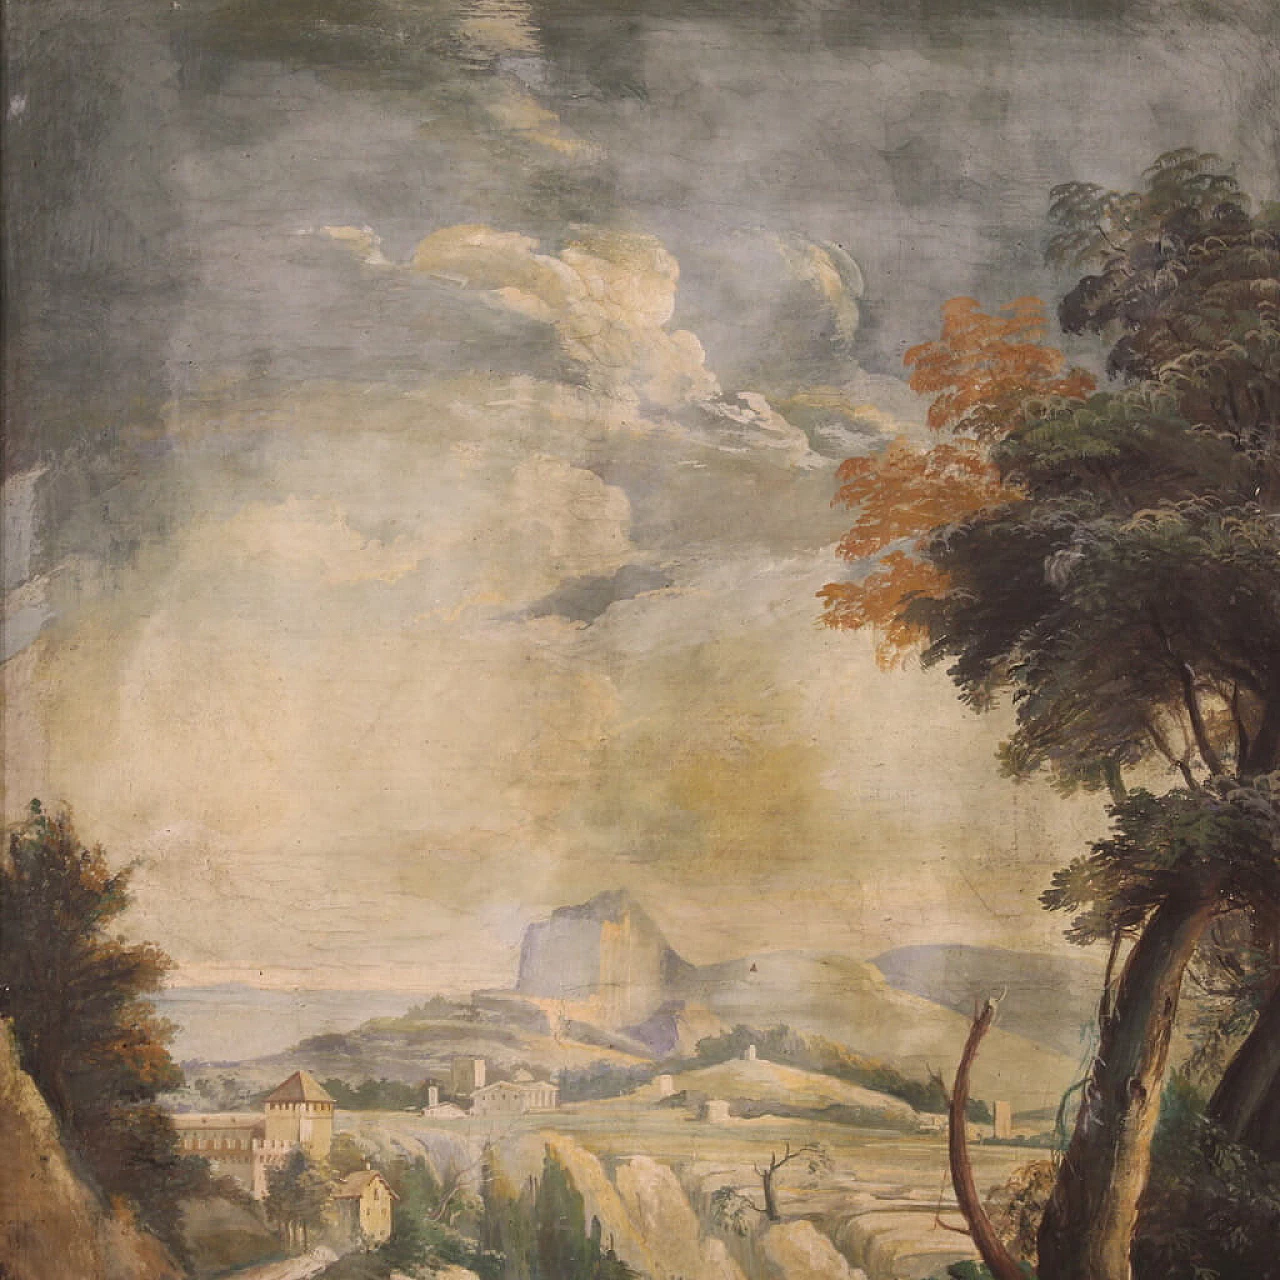 Landscape with figures, tempera painting on paper, late 18th century 4